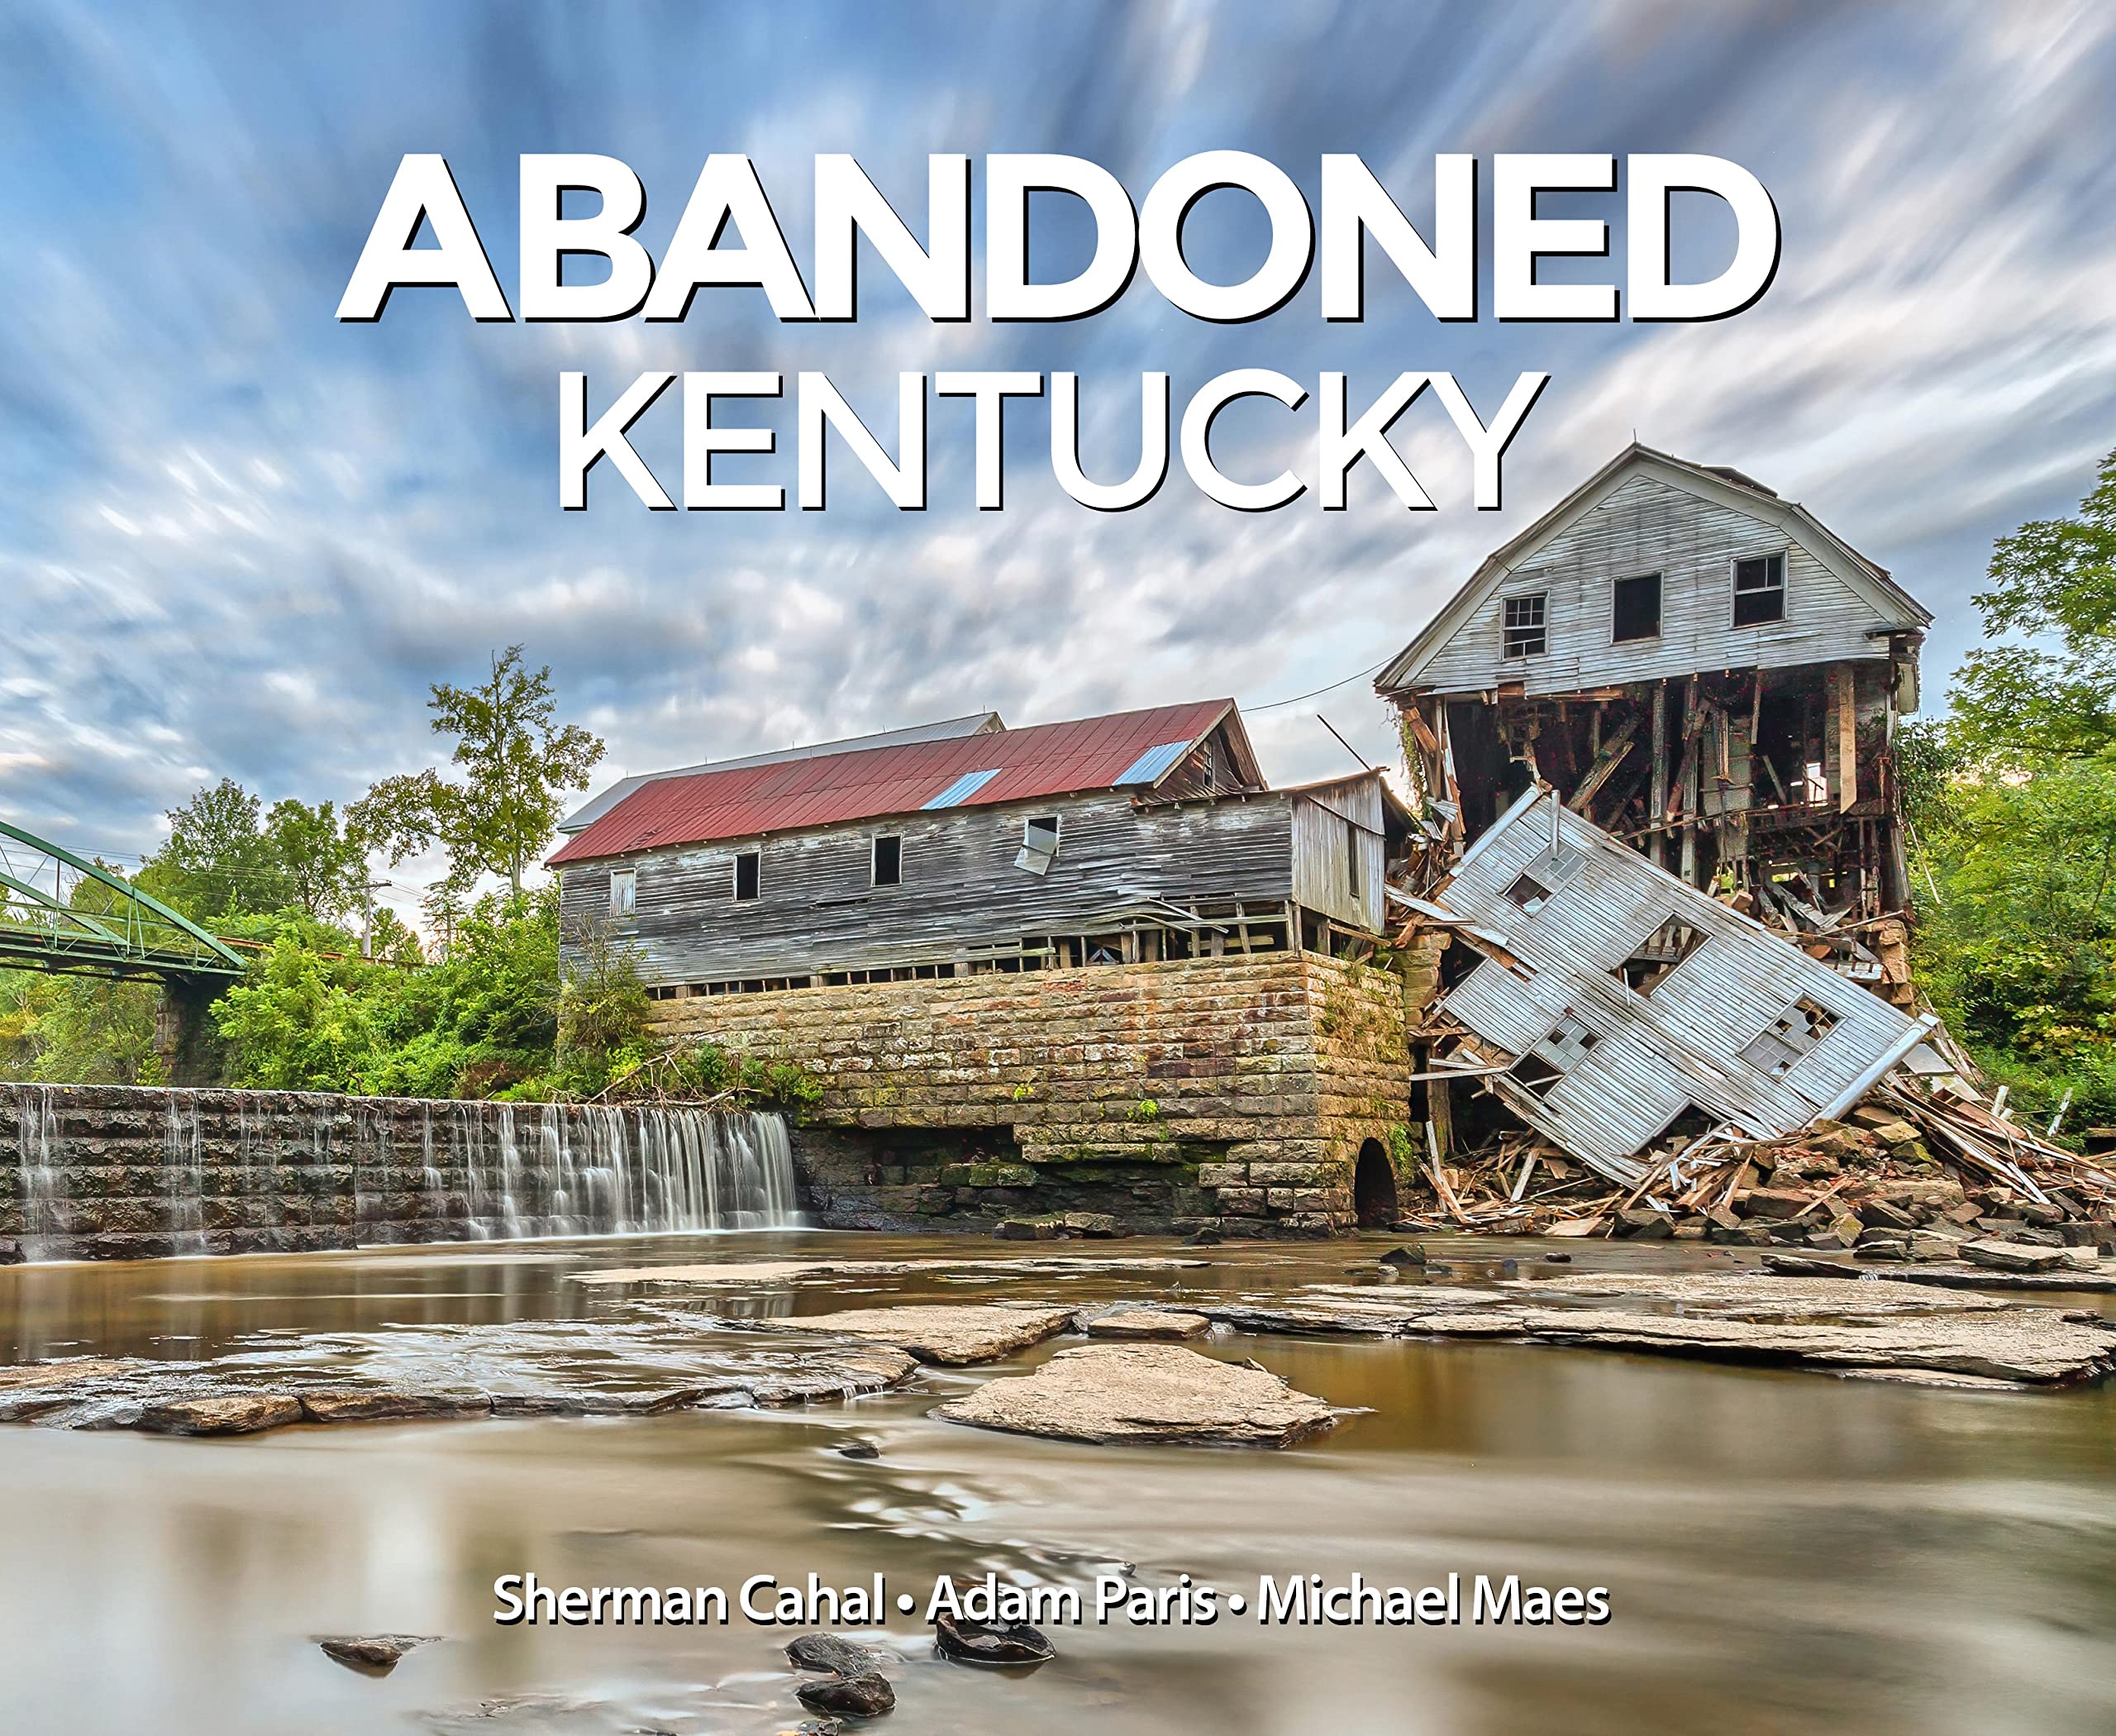 Sherman Cahal, Adam Paris and Michael Maes to Participate in the Kentucky Book Festival with “Abandoned Kentucky”